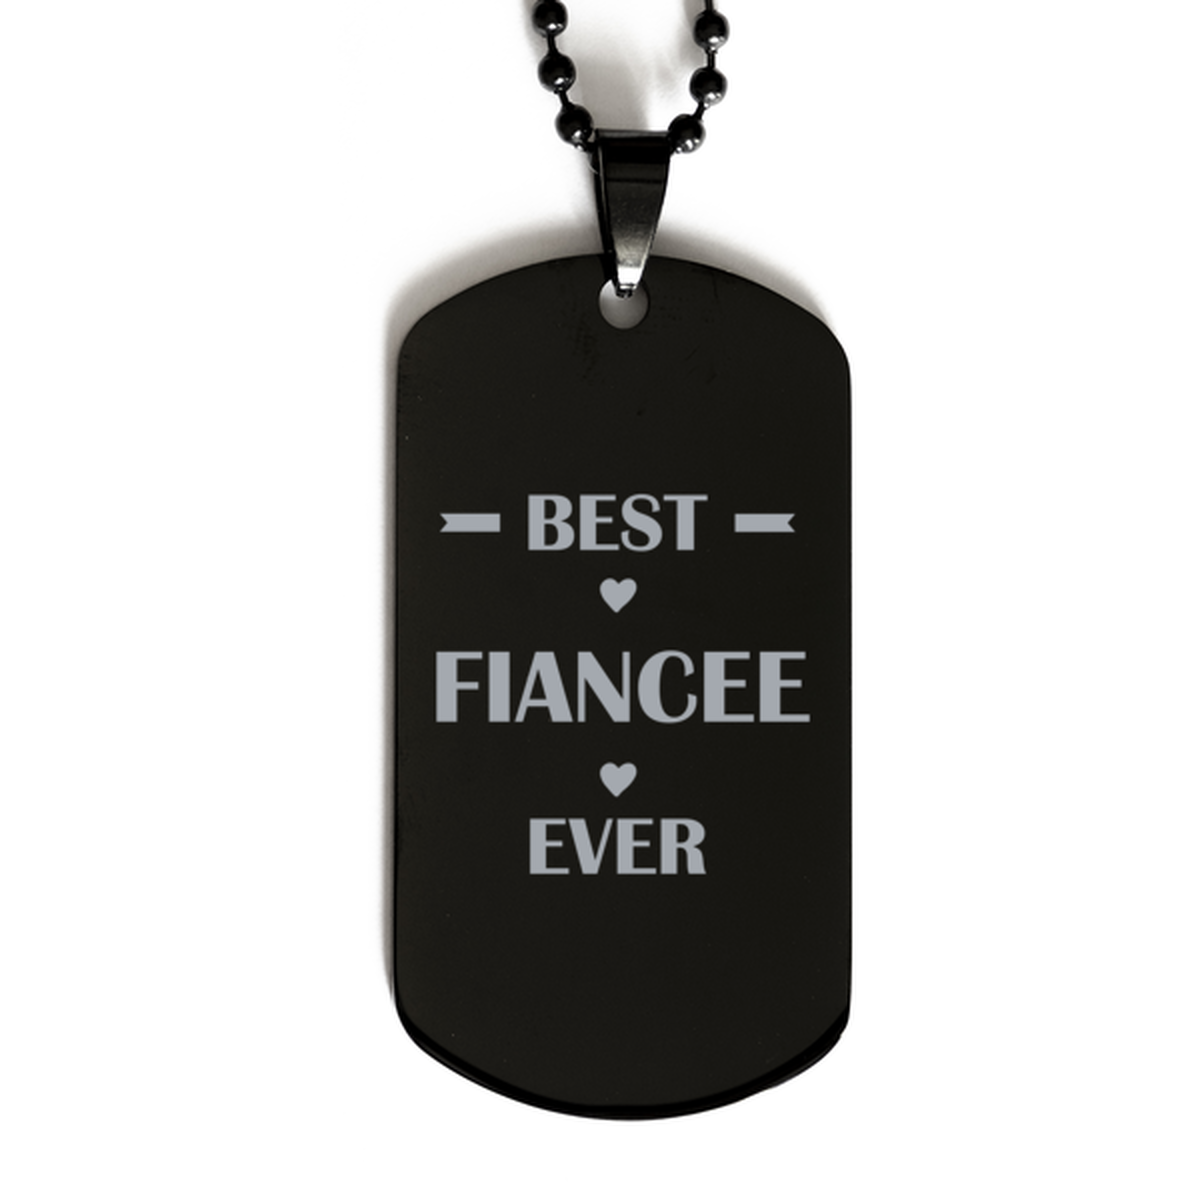 Best Fiancee Ever Fiancee Gifts, Funny Black Dog Tag For Fiancee, Birthday Family Presents Engraved Necklace For Women